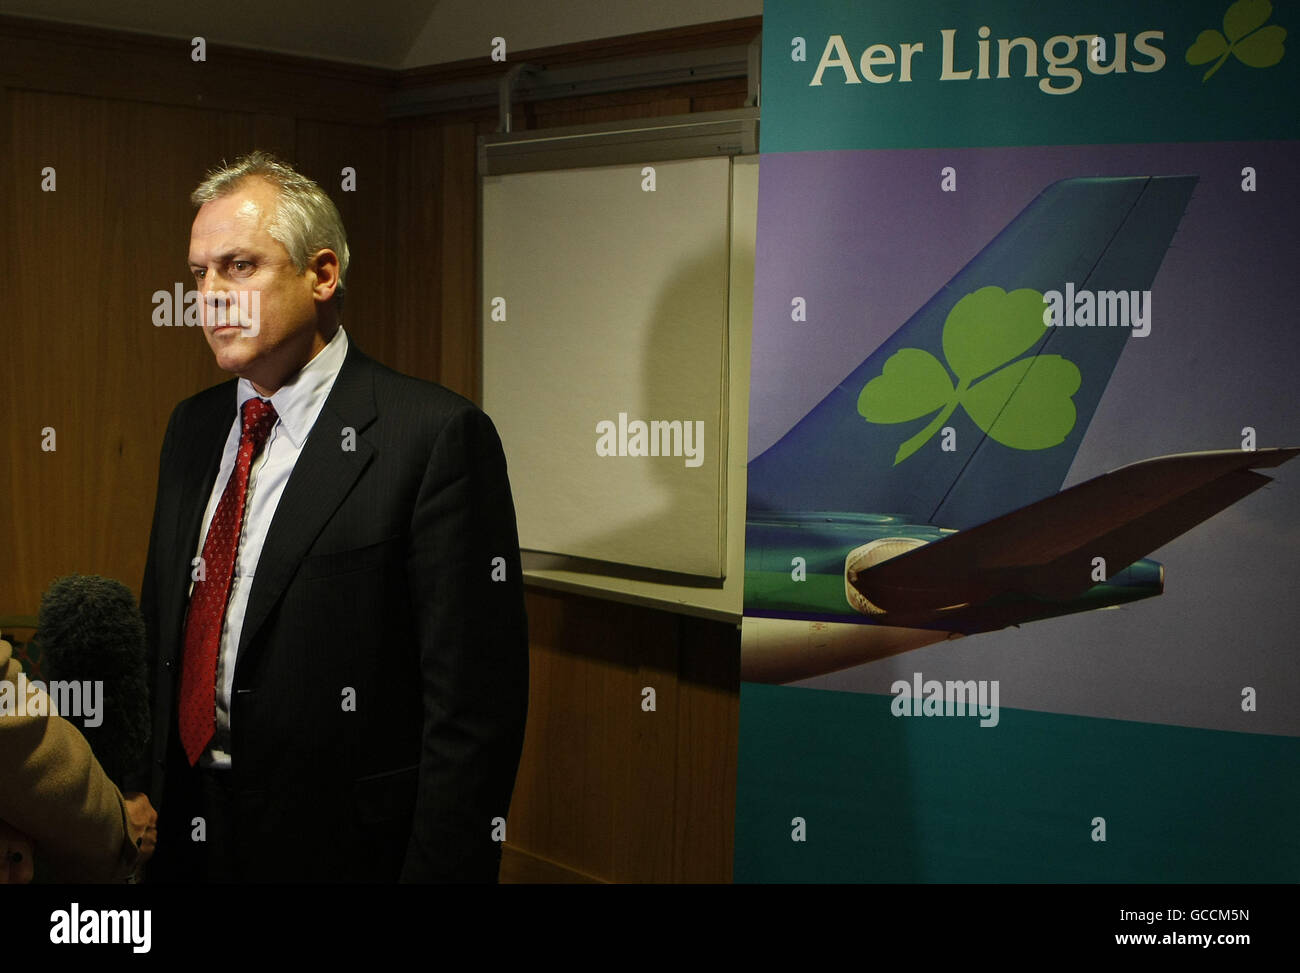 Aer Lingus operating loss. Aer Lingus Head of Human resources Michael Grealy speaking at press conference in Dublin today. Stock Photo